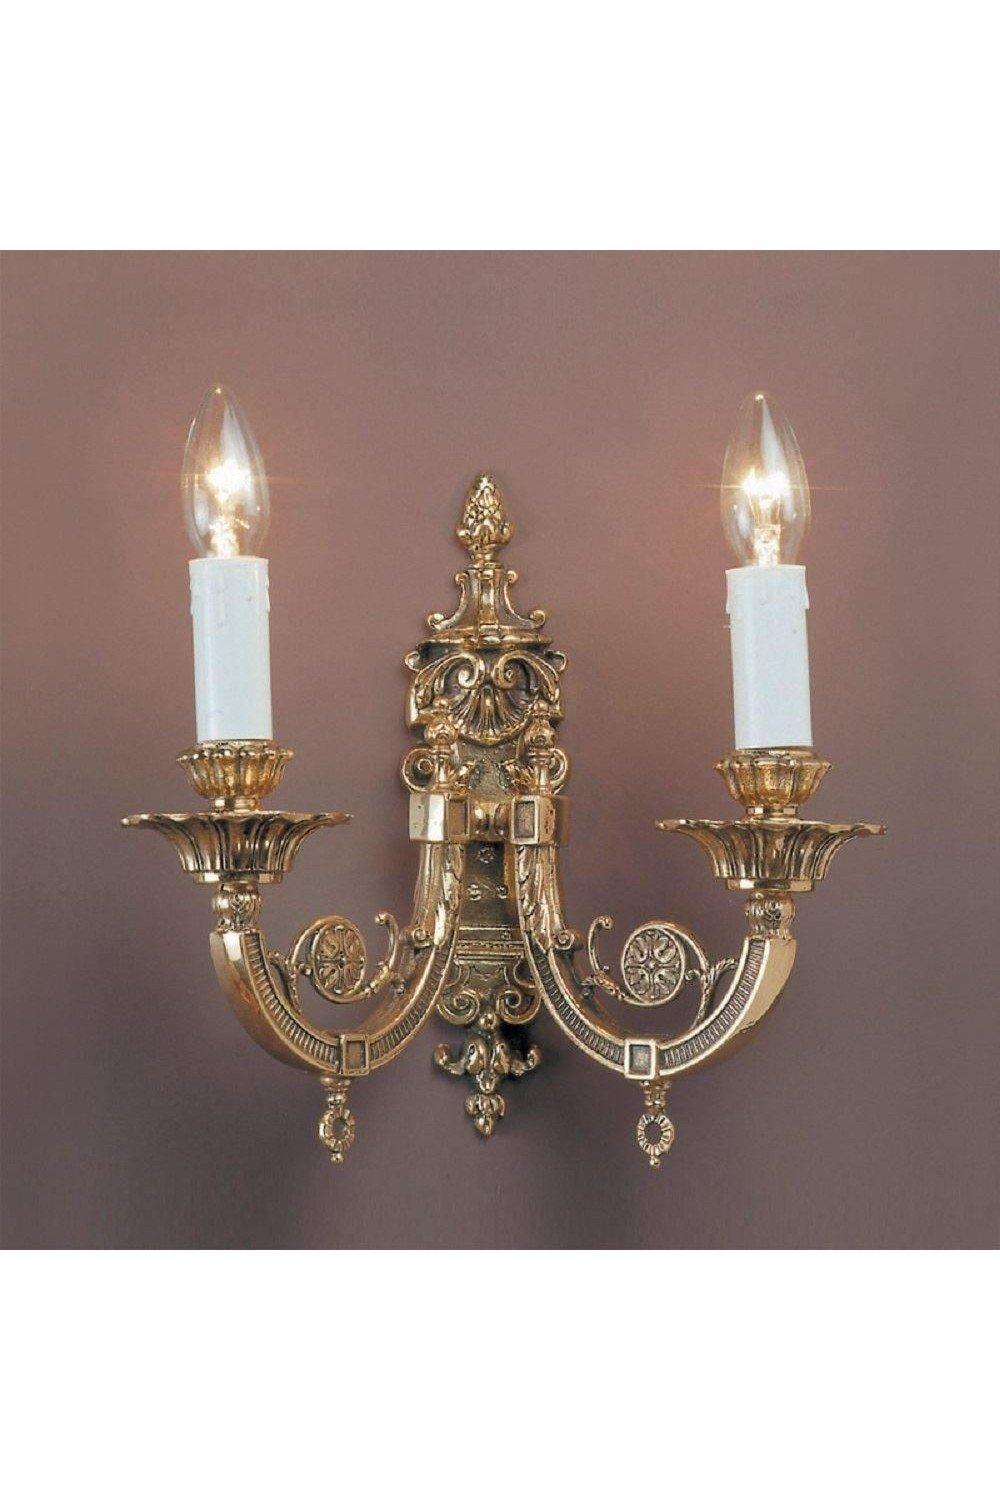 Chelsea Polished Brass Candle Wall Lamp